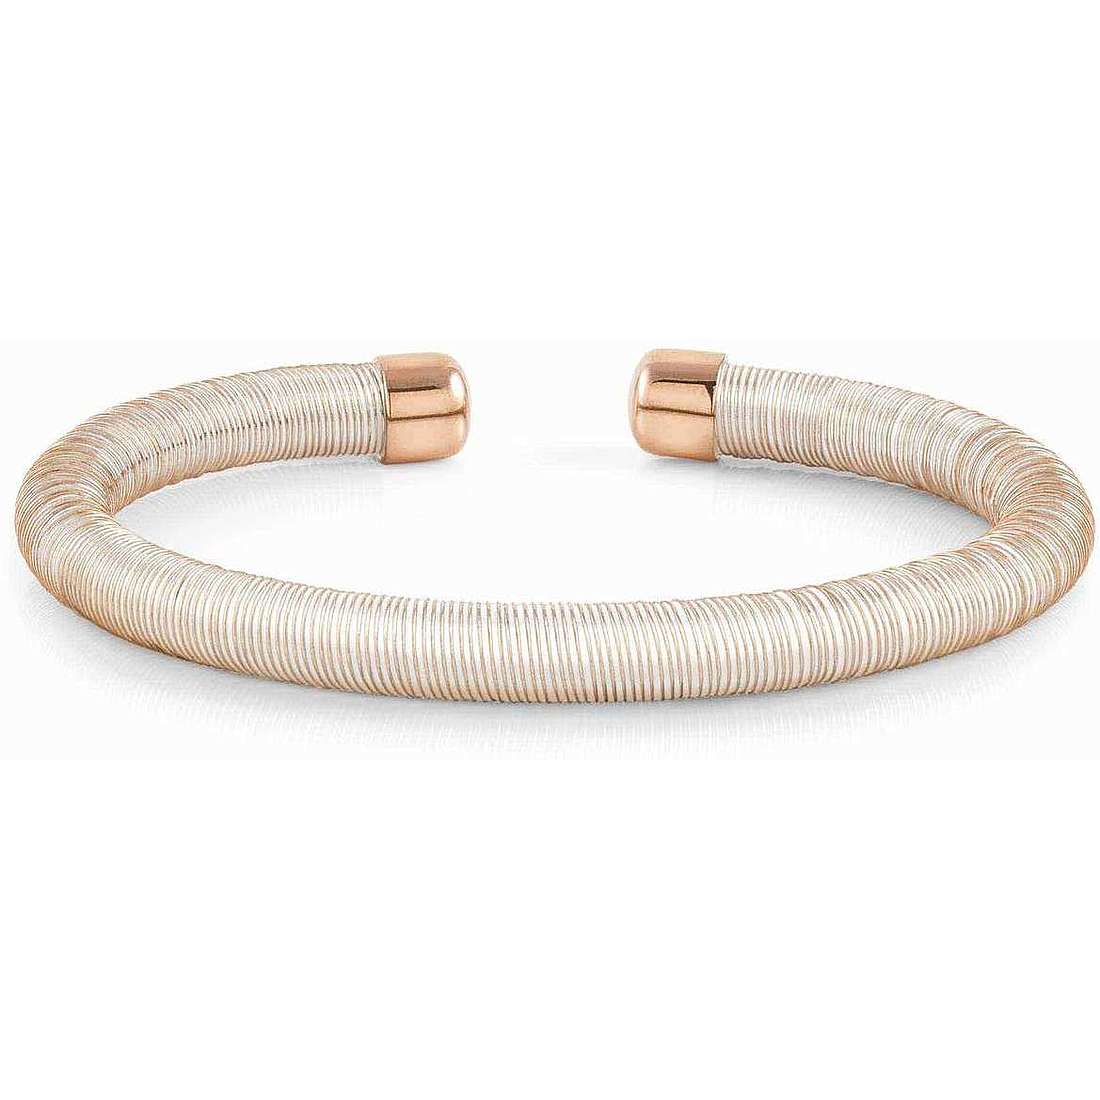 Essenzia Bracelet in Rose Gold & White | Nomination Italy | Luby 